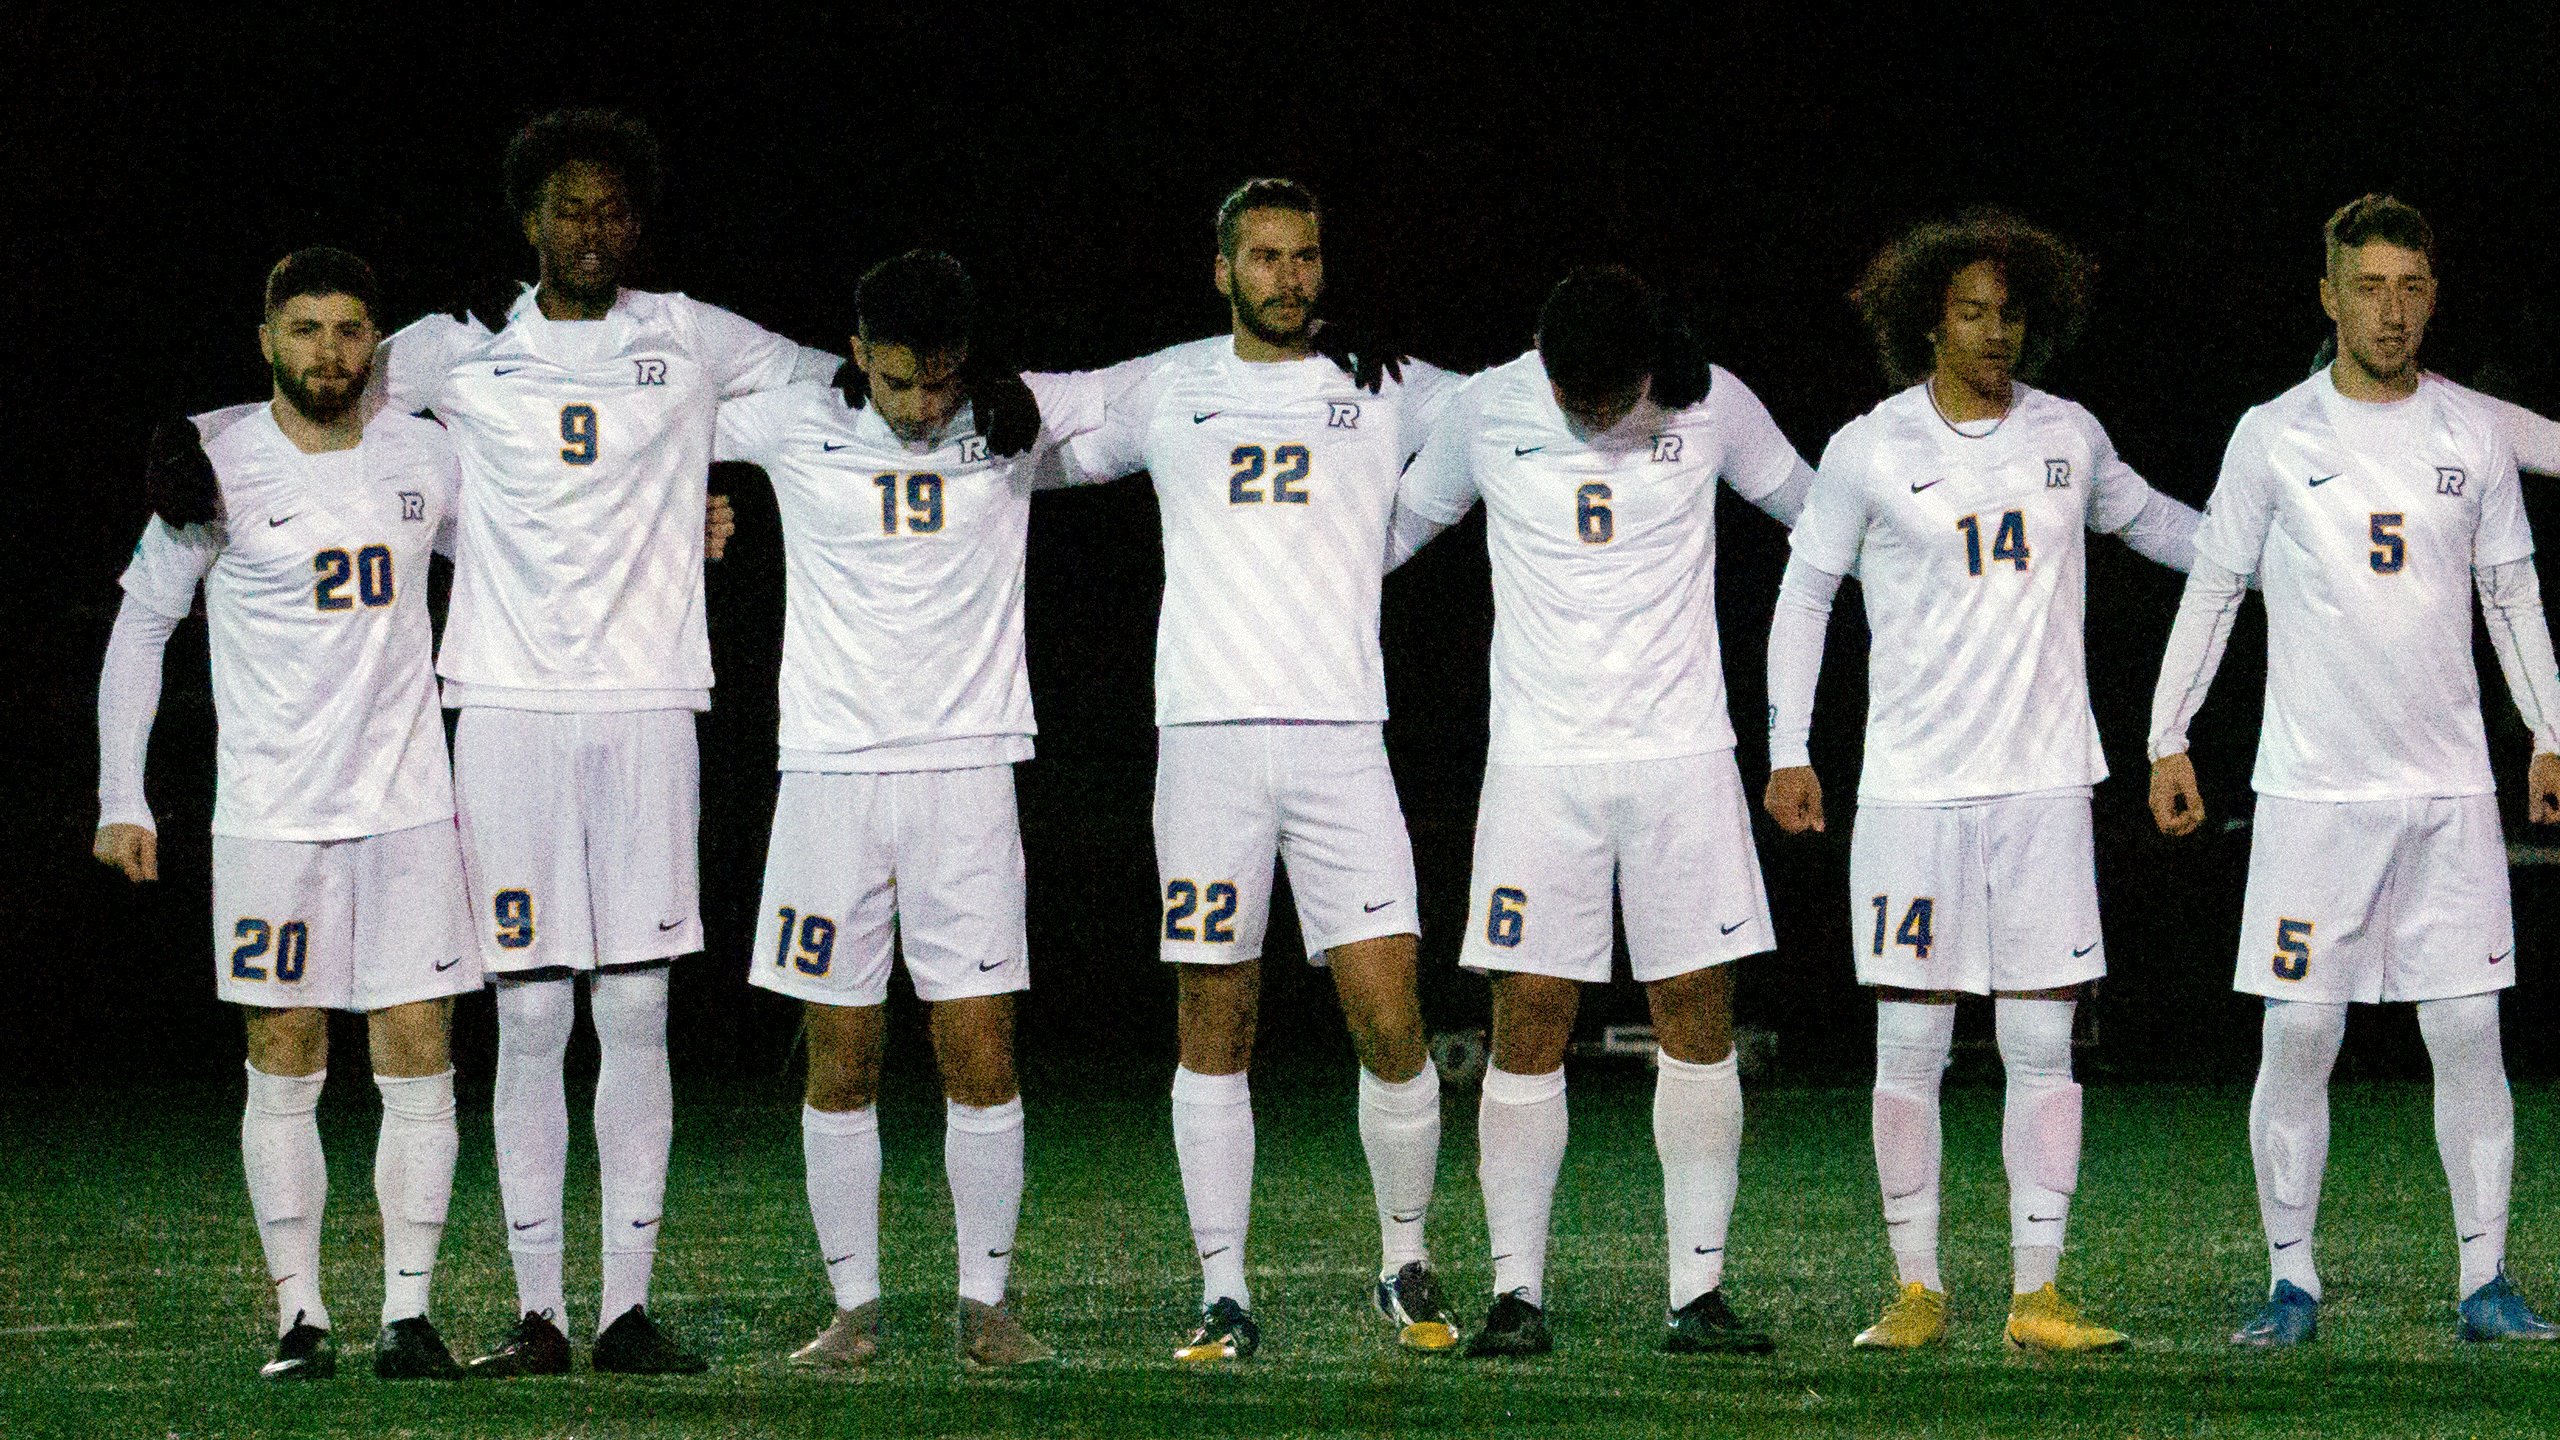 The Rams men's soccer team huddle before the game